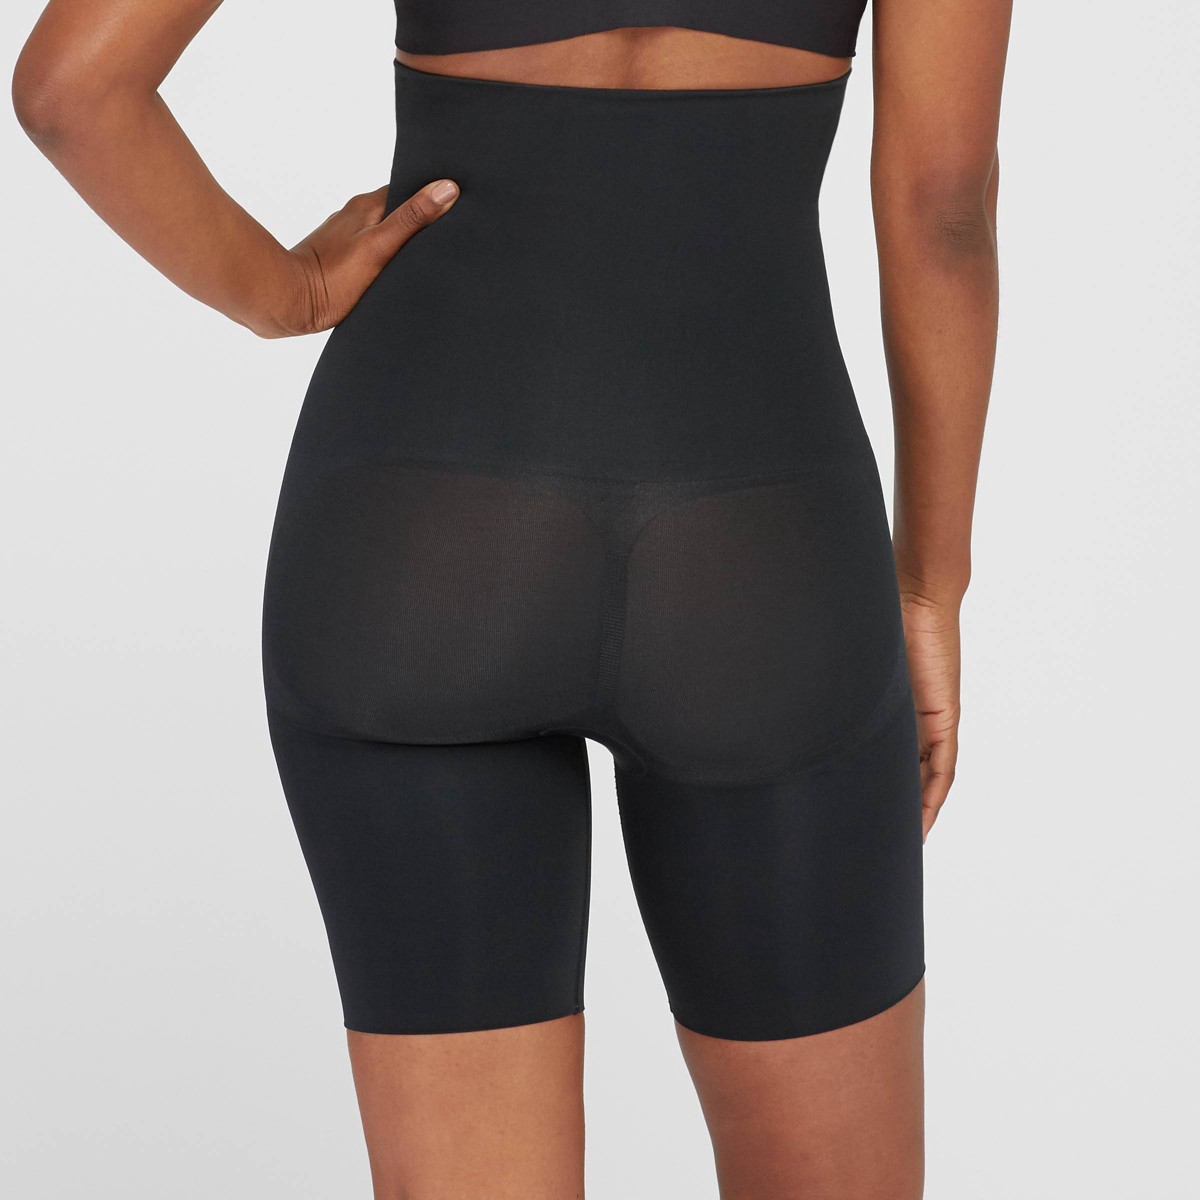 slide 2 of 5, ASSETS by SPANX Women's Remarkable Results High-Waist Mid-thigh Shaper - Black L, 1 ct